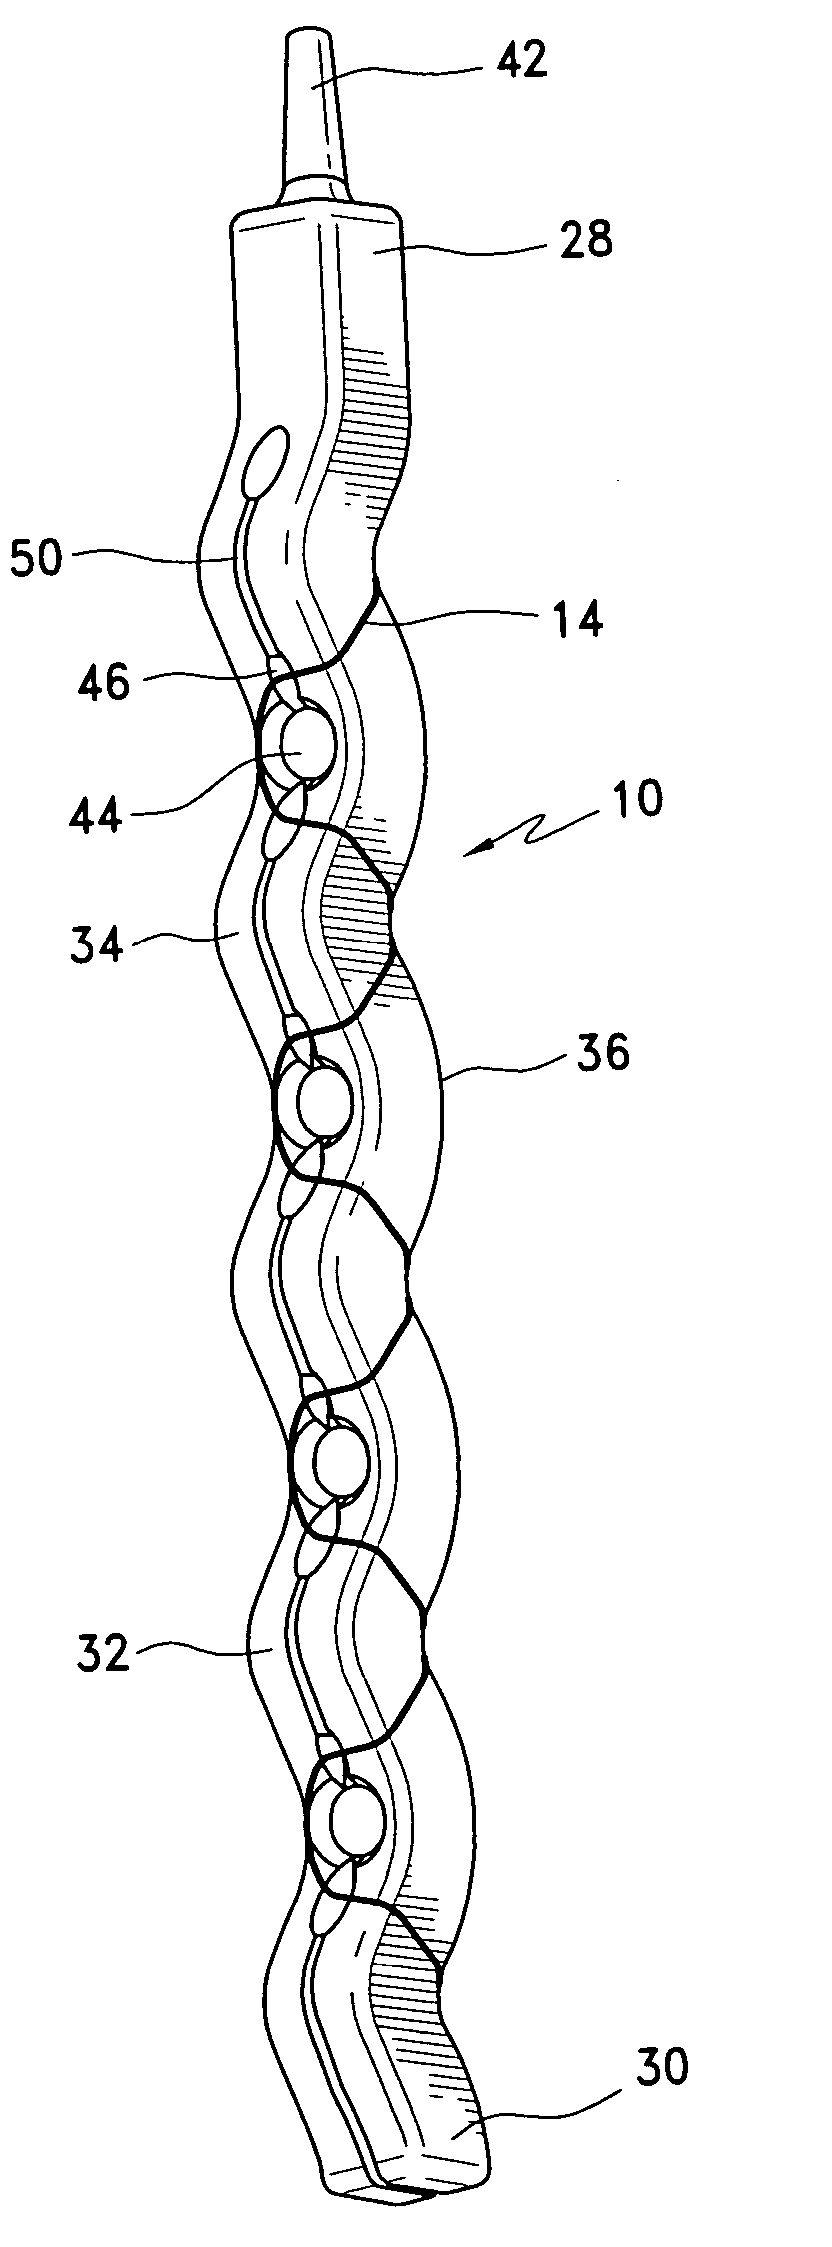 Apparatus for single pass gastric restriction